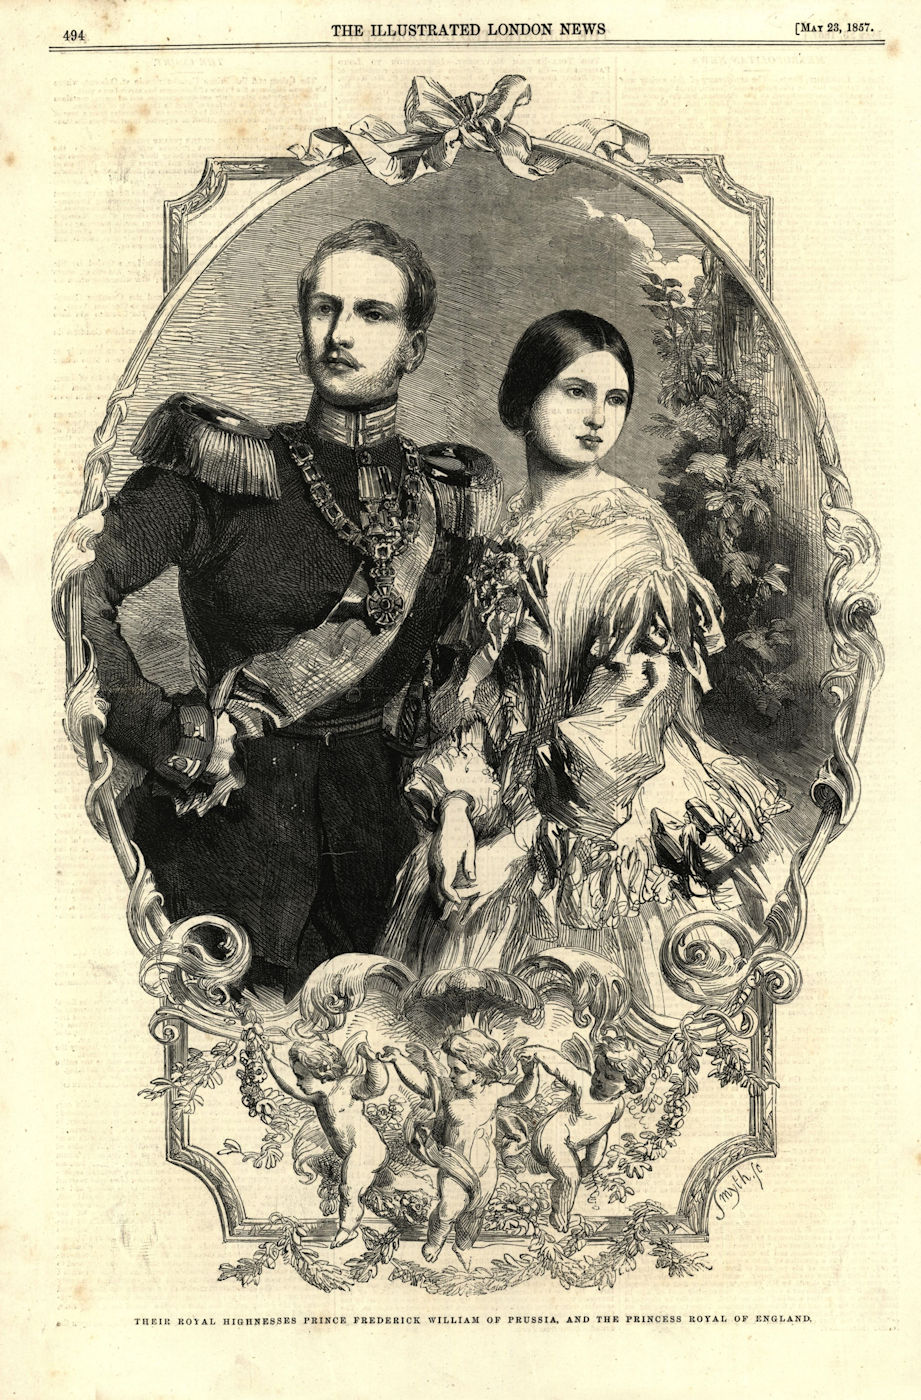 Prince Frederick William of Prussia & the Princess Royal of England 1857 print